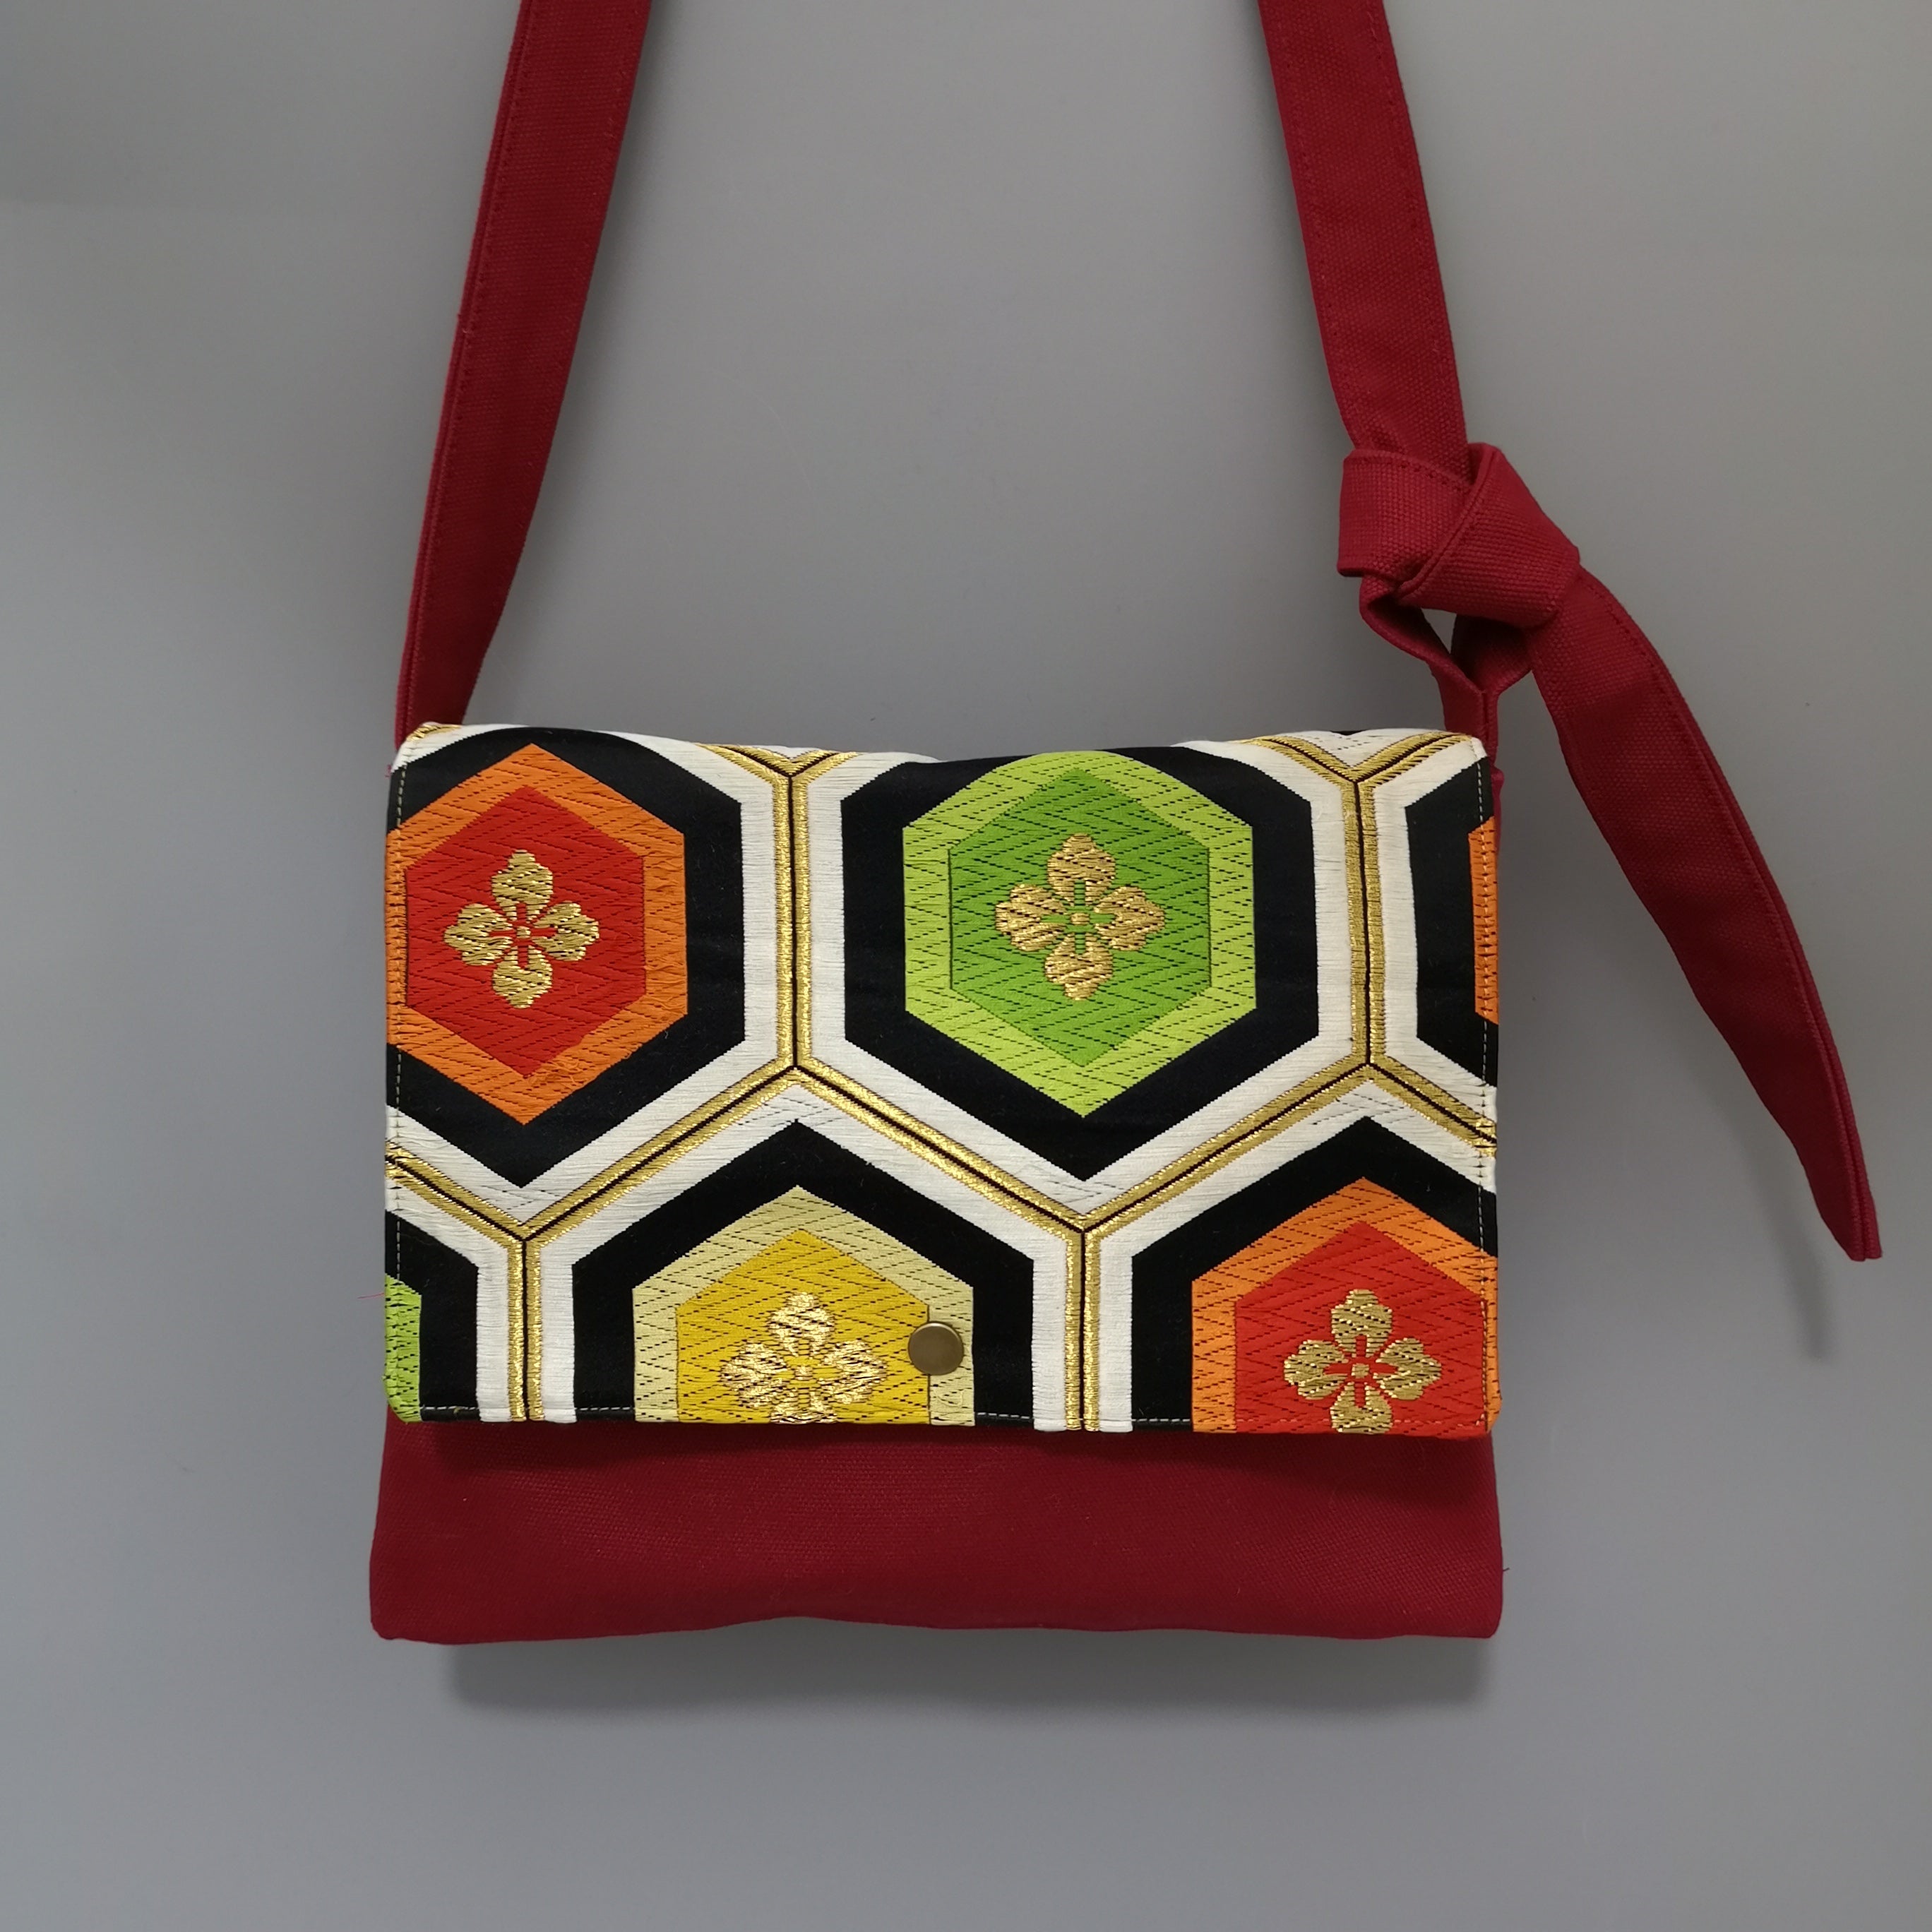 *OC Obi Handknotted Canvas Bags- 1412